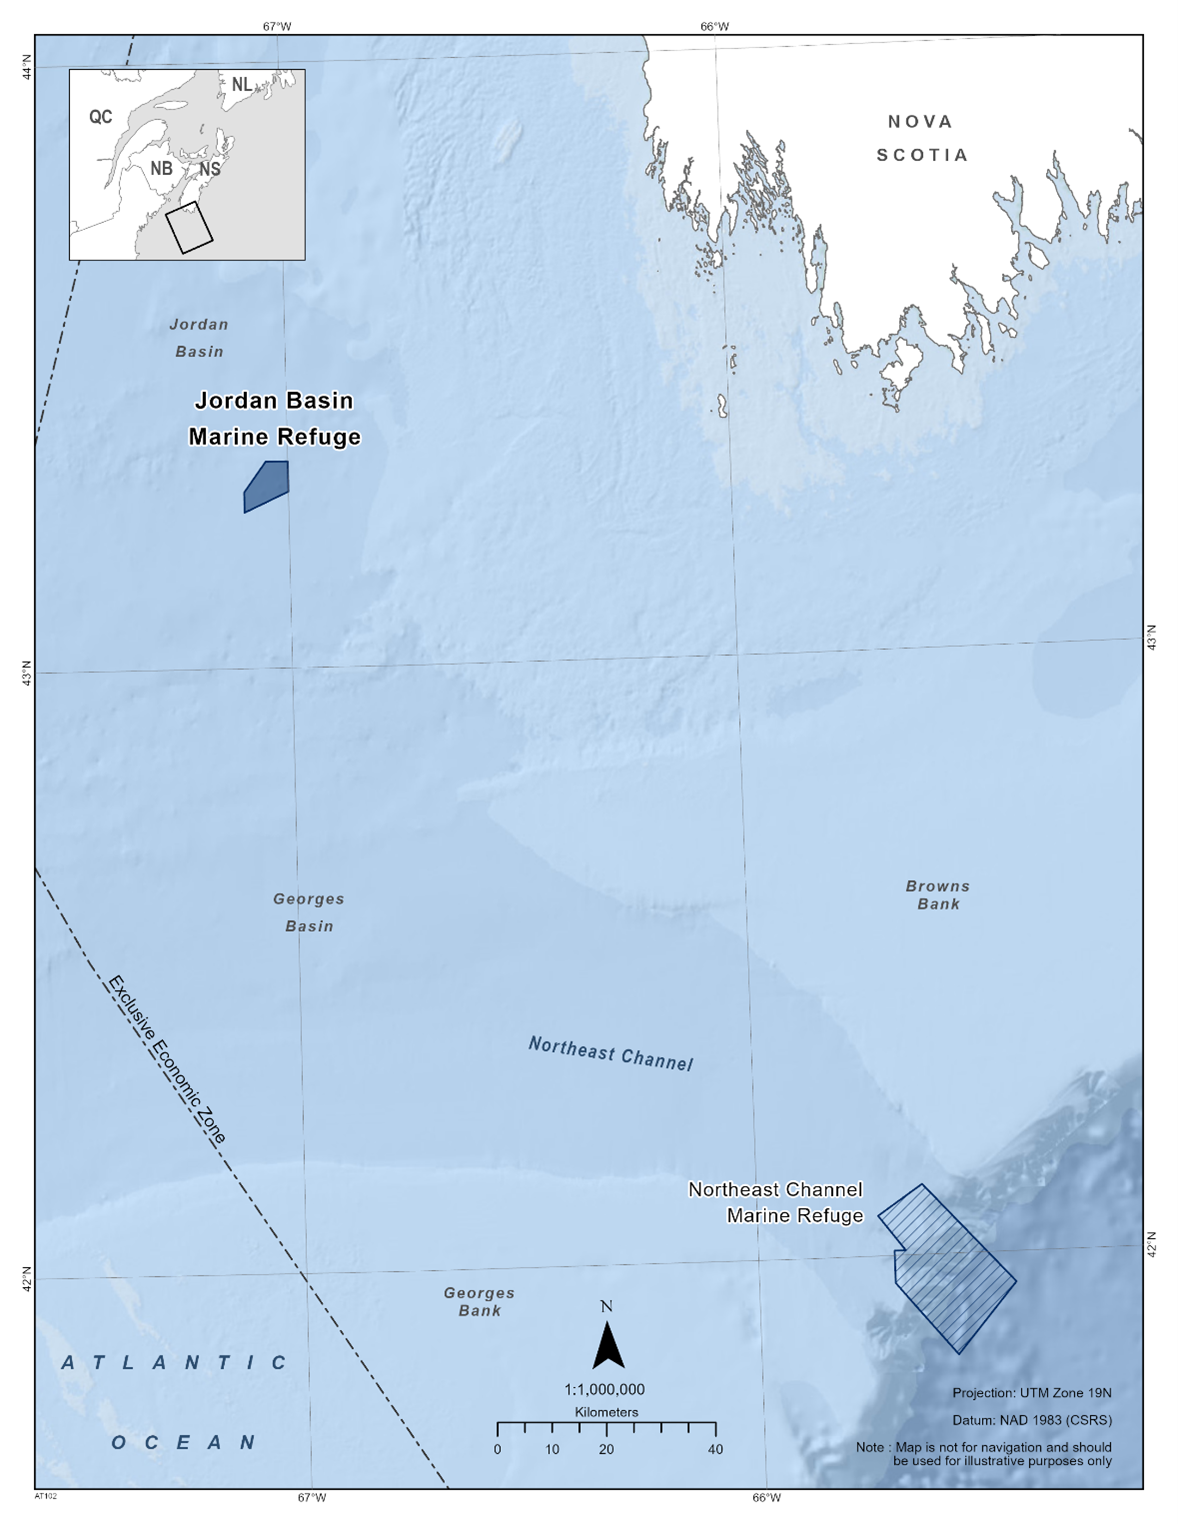 Map of the Jordan Basin Marine Refuge in dark blue. The map also features nearby marine refuges with dark blue diagonal lines (Northeast Channel Marine Refuge). 